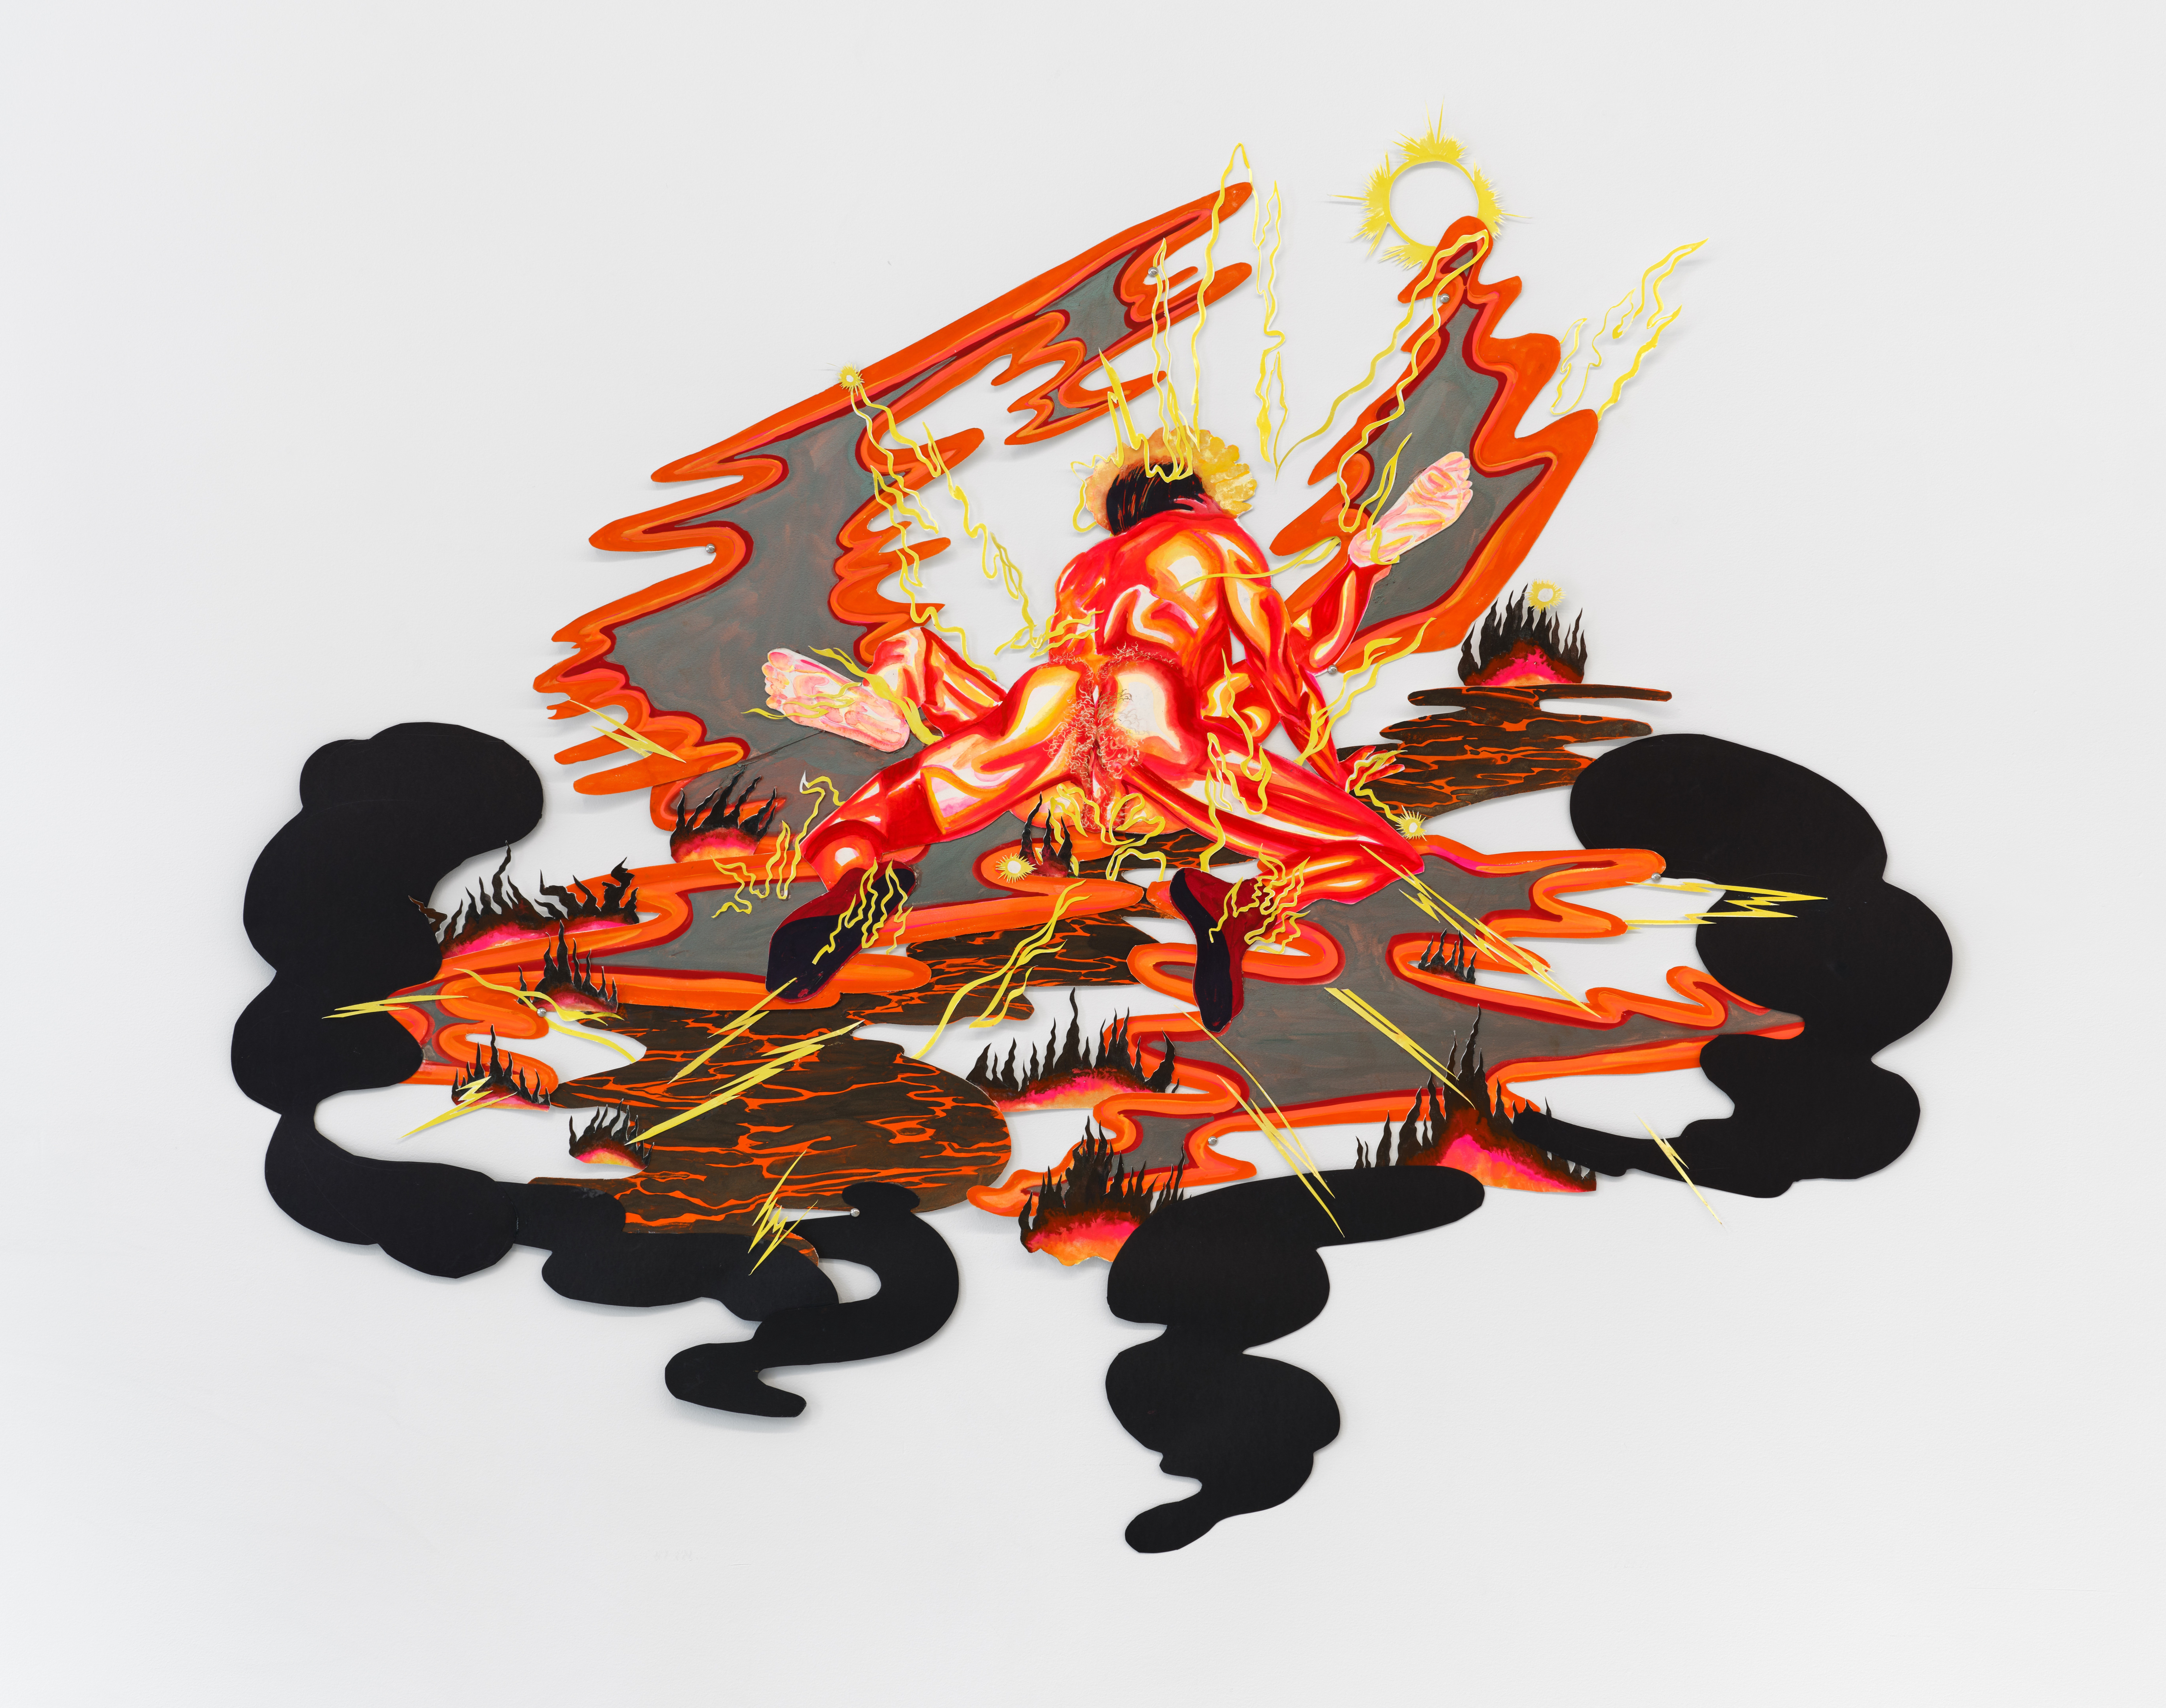 Two nude figures cut out of paper engage in an intimate act that ripples into orange and black pools of lava that surround them.